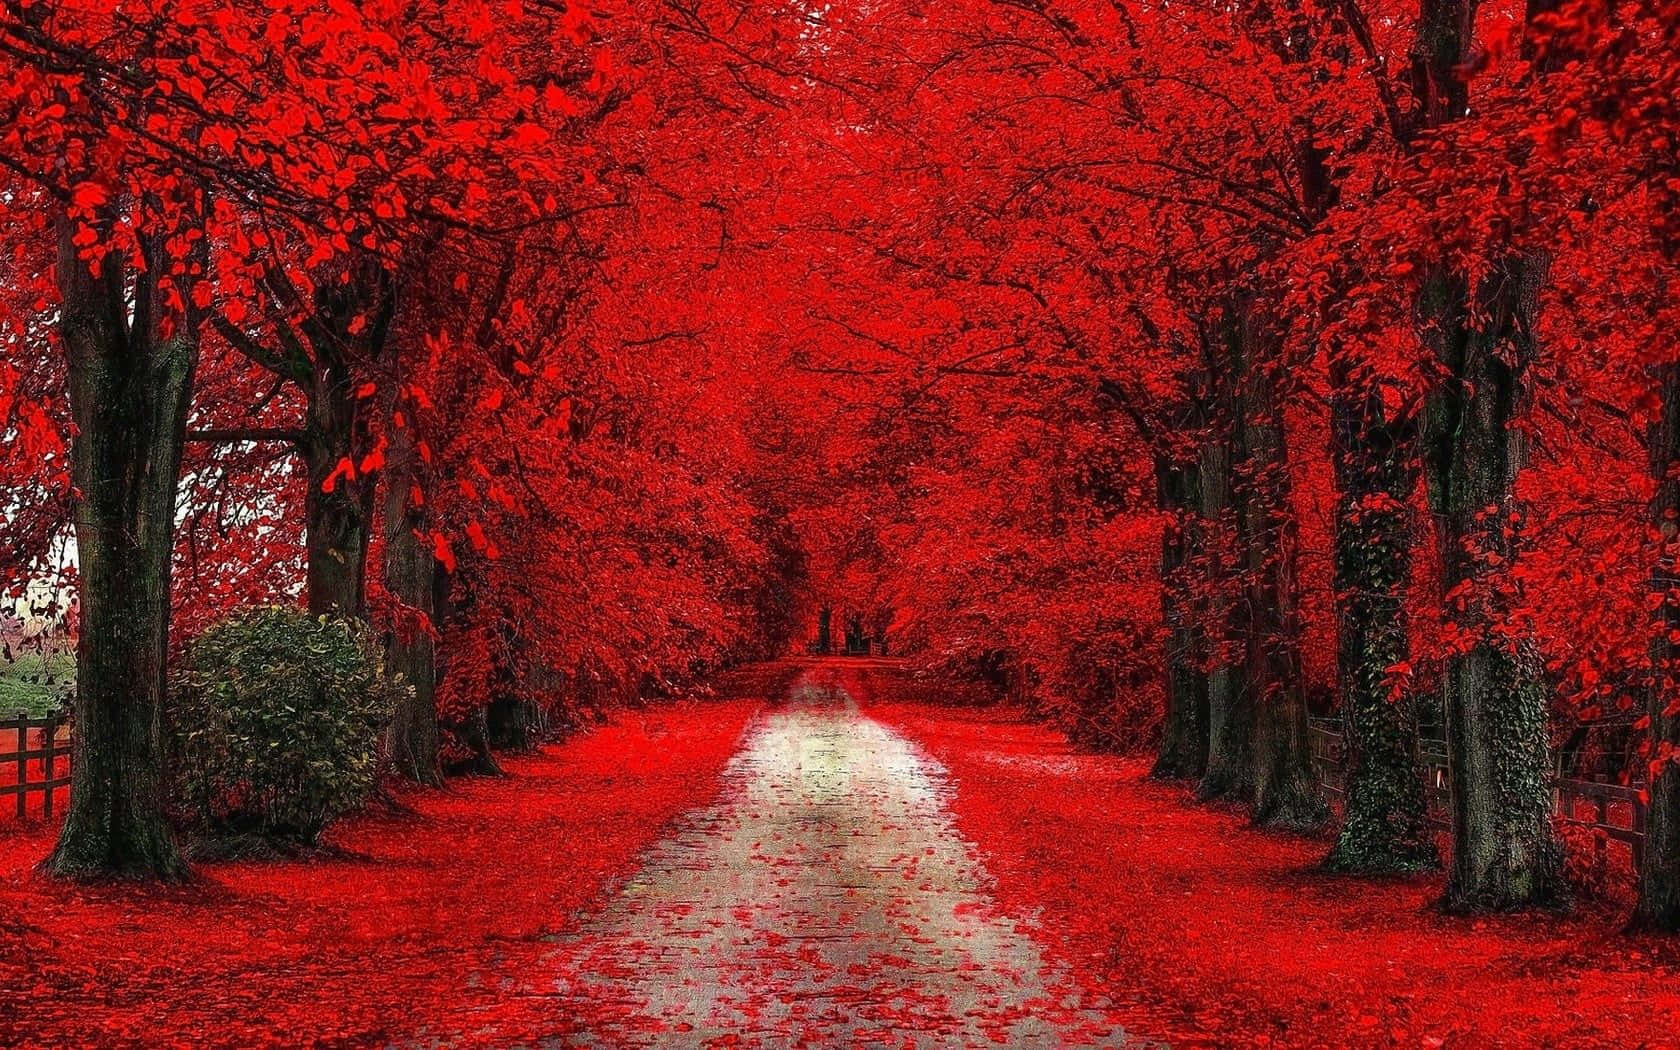 A tranquil scene of a red tree surrounded by nature Wallpaper